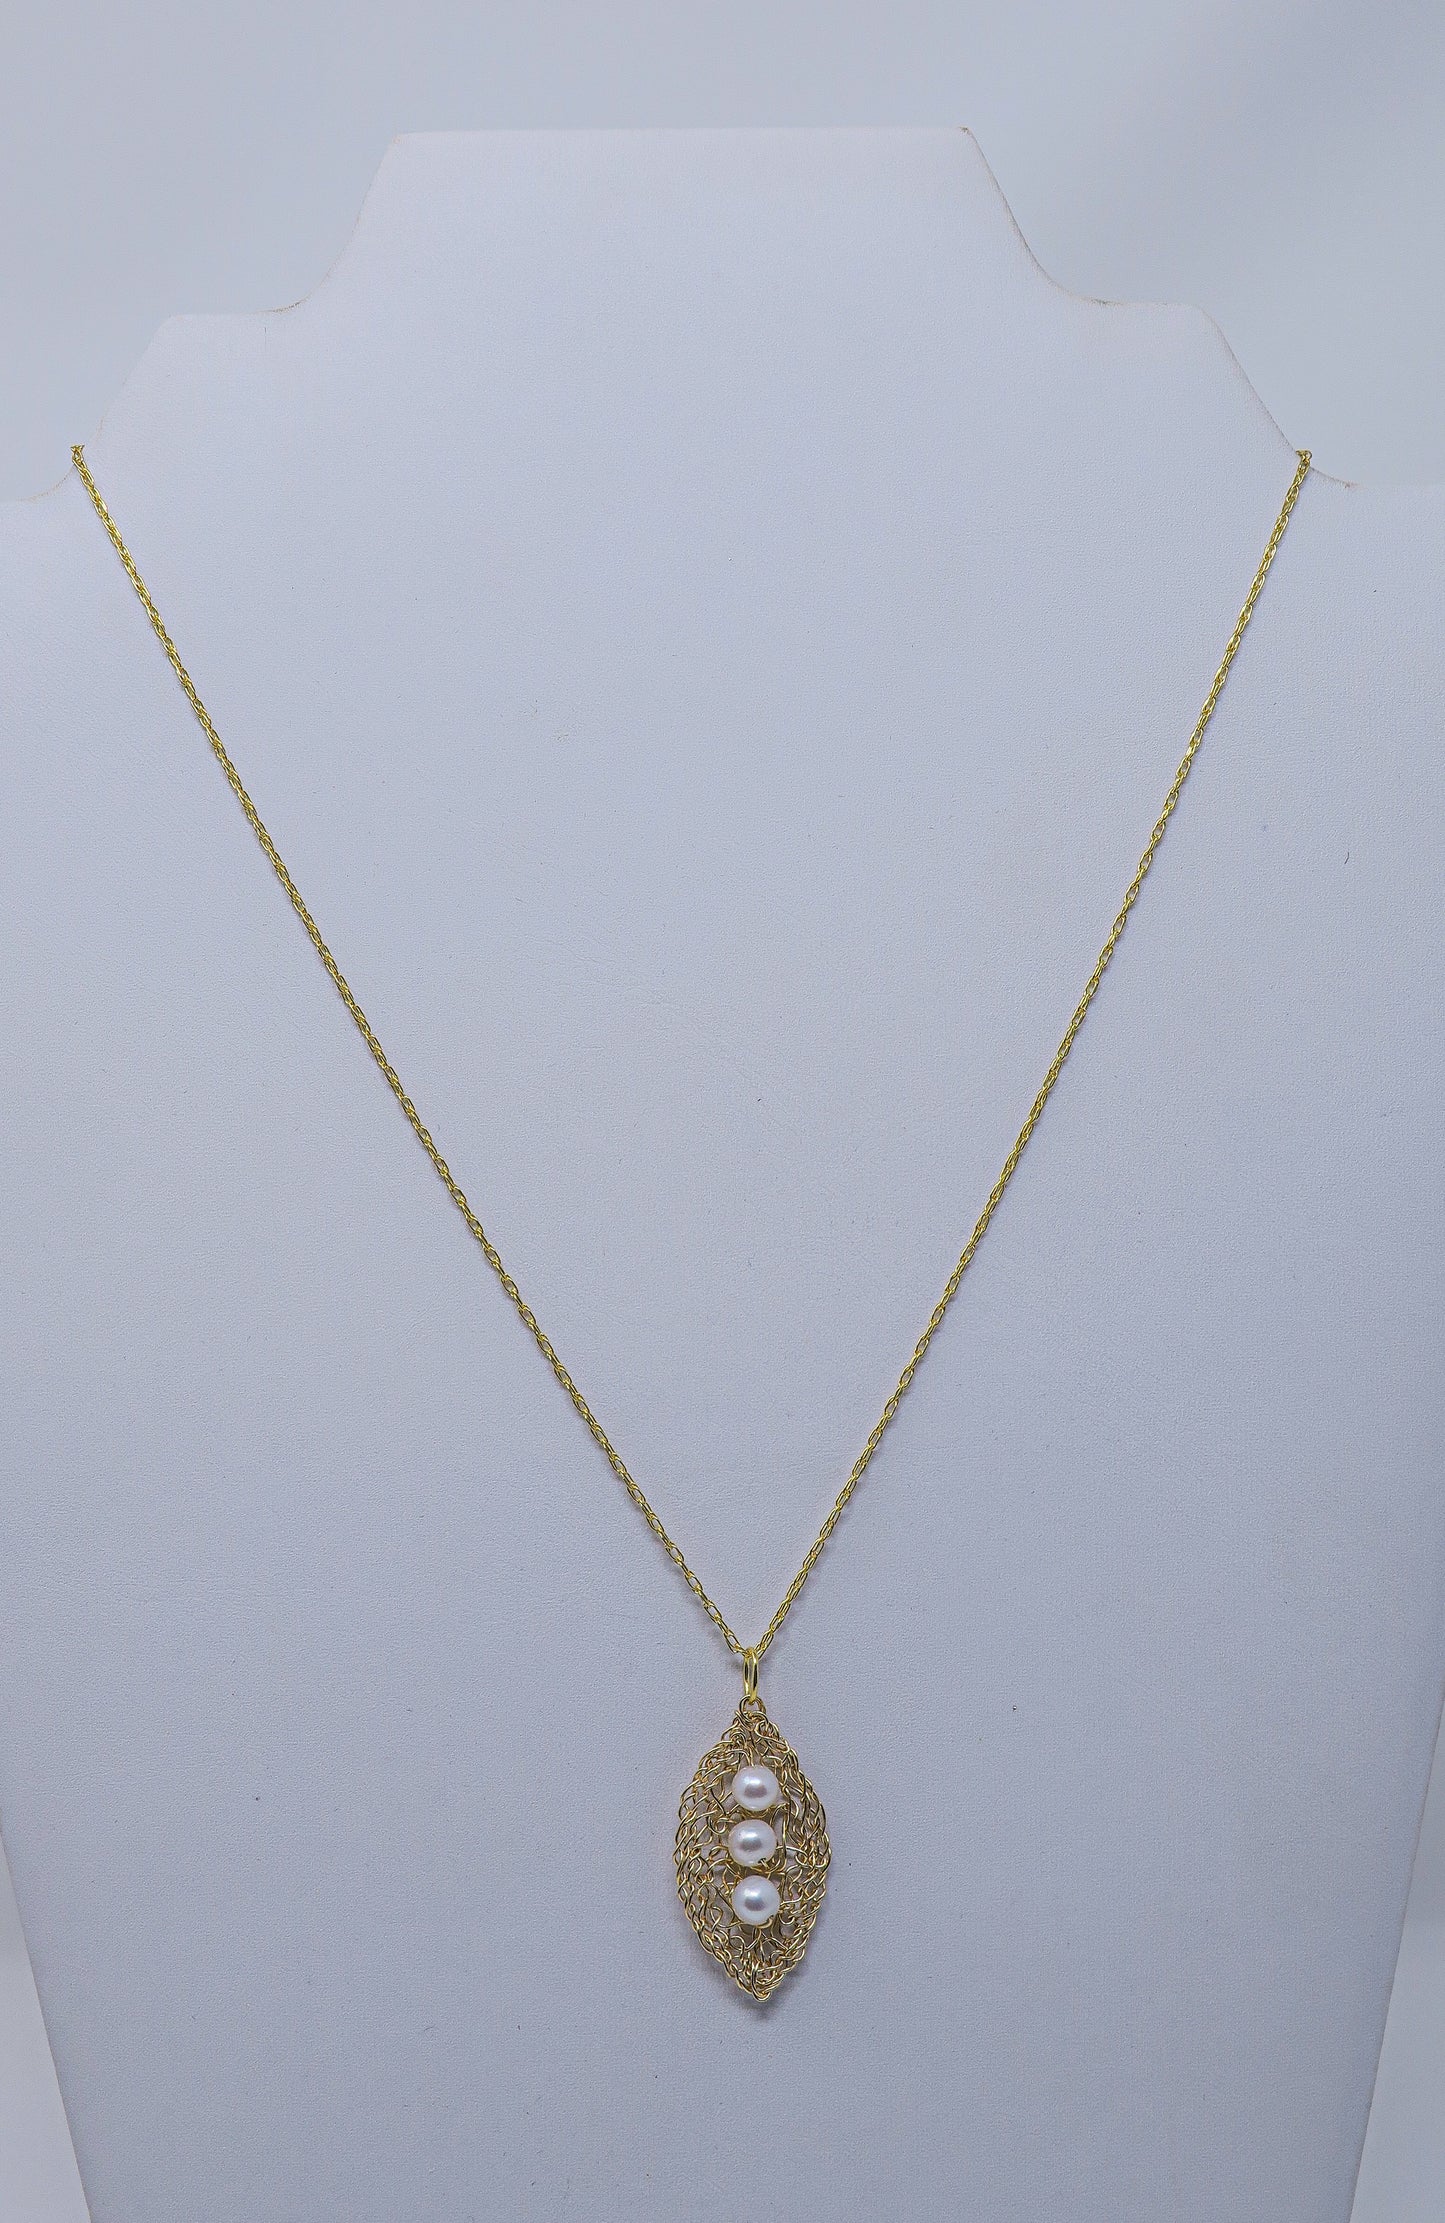 ‘Three Peas in a Pod' Gold-Filled Pendant with Pearls on a 18” Chain | by Kathryn Stanko